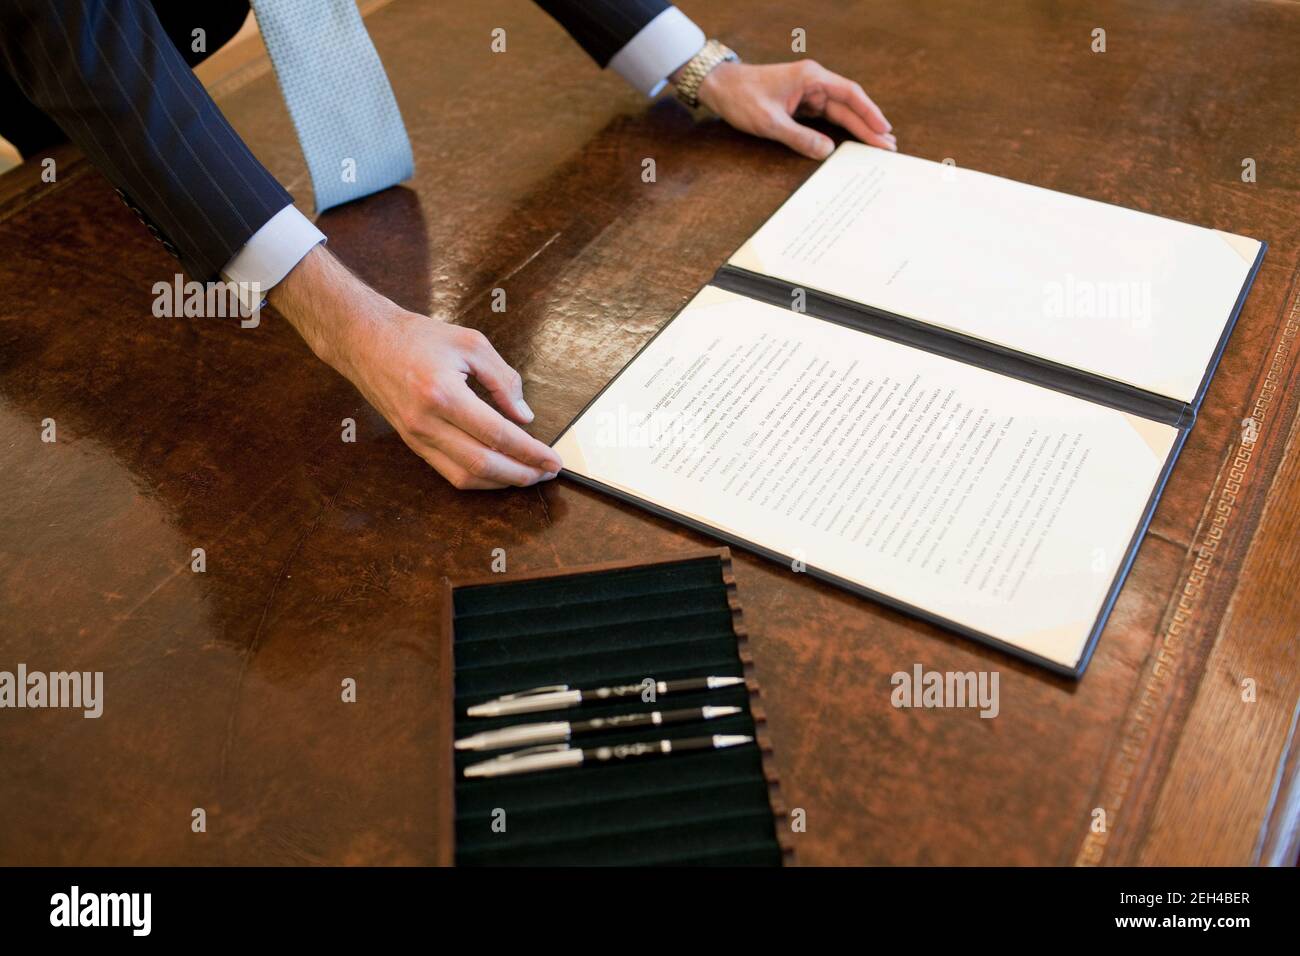 A staff member positions the Council of Environoment Quality (CEQ) Executive Order on President Barack Obama's desk prior to his signing the document in the Oval Office, Oct. 5, 2009. Stock Photo